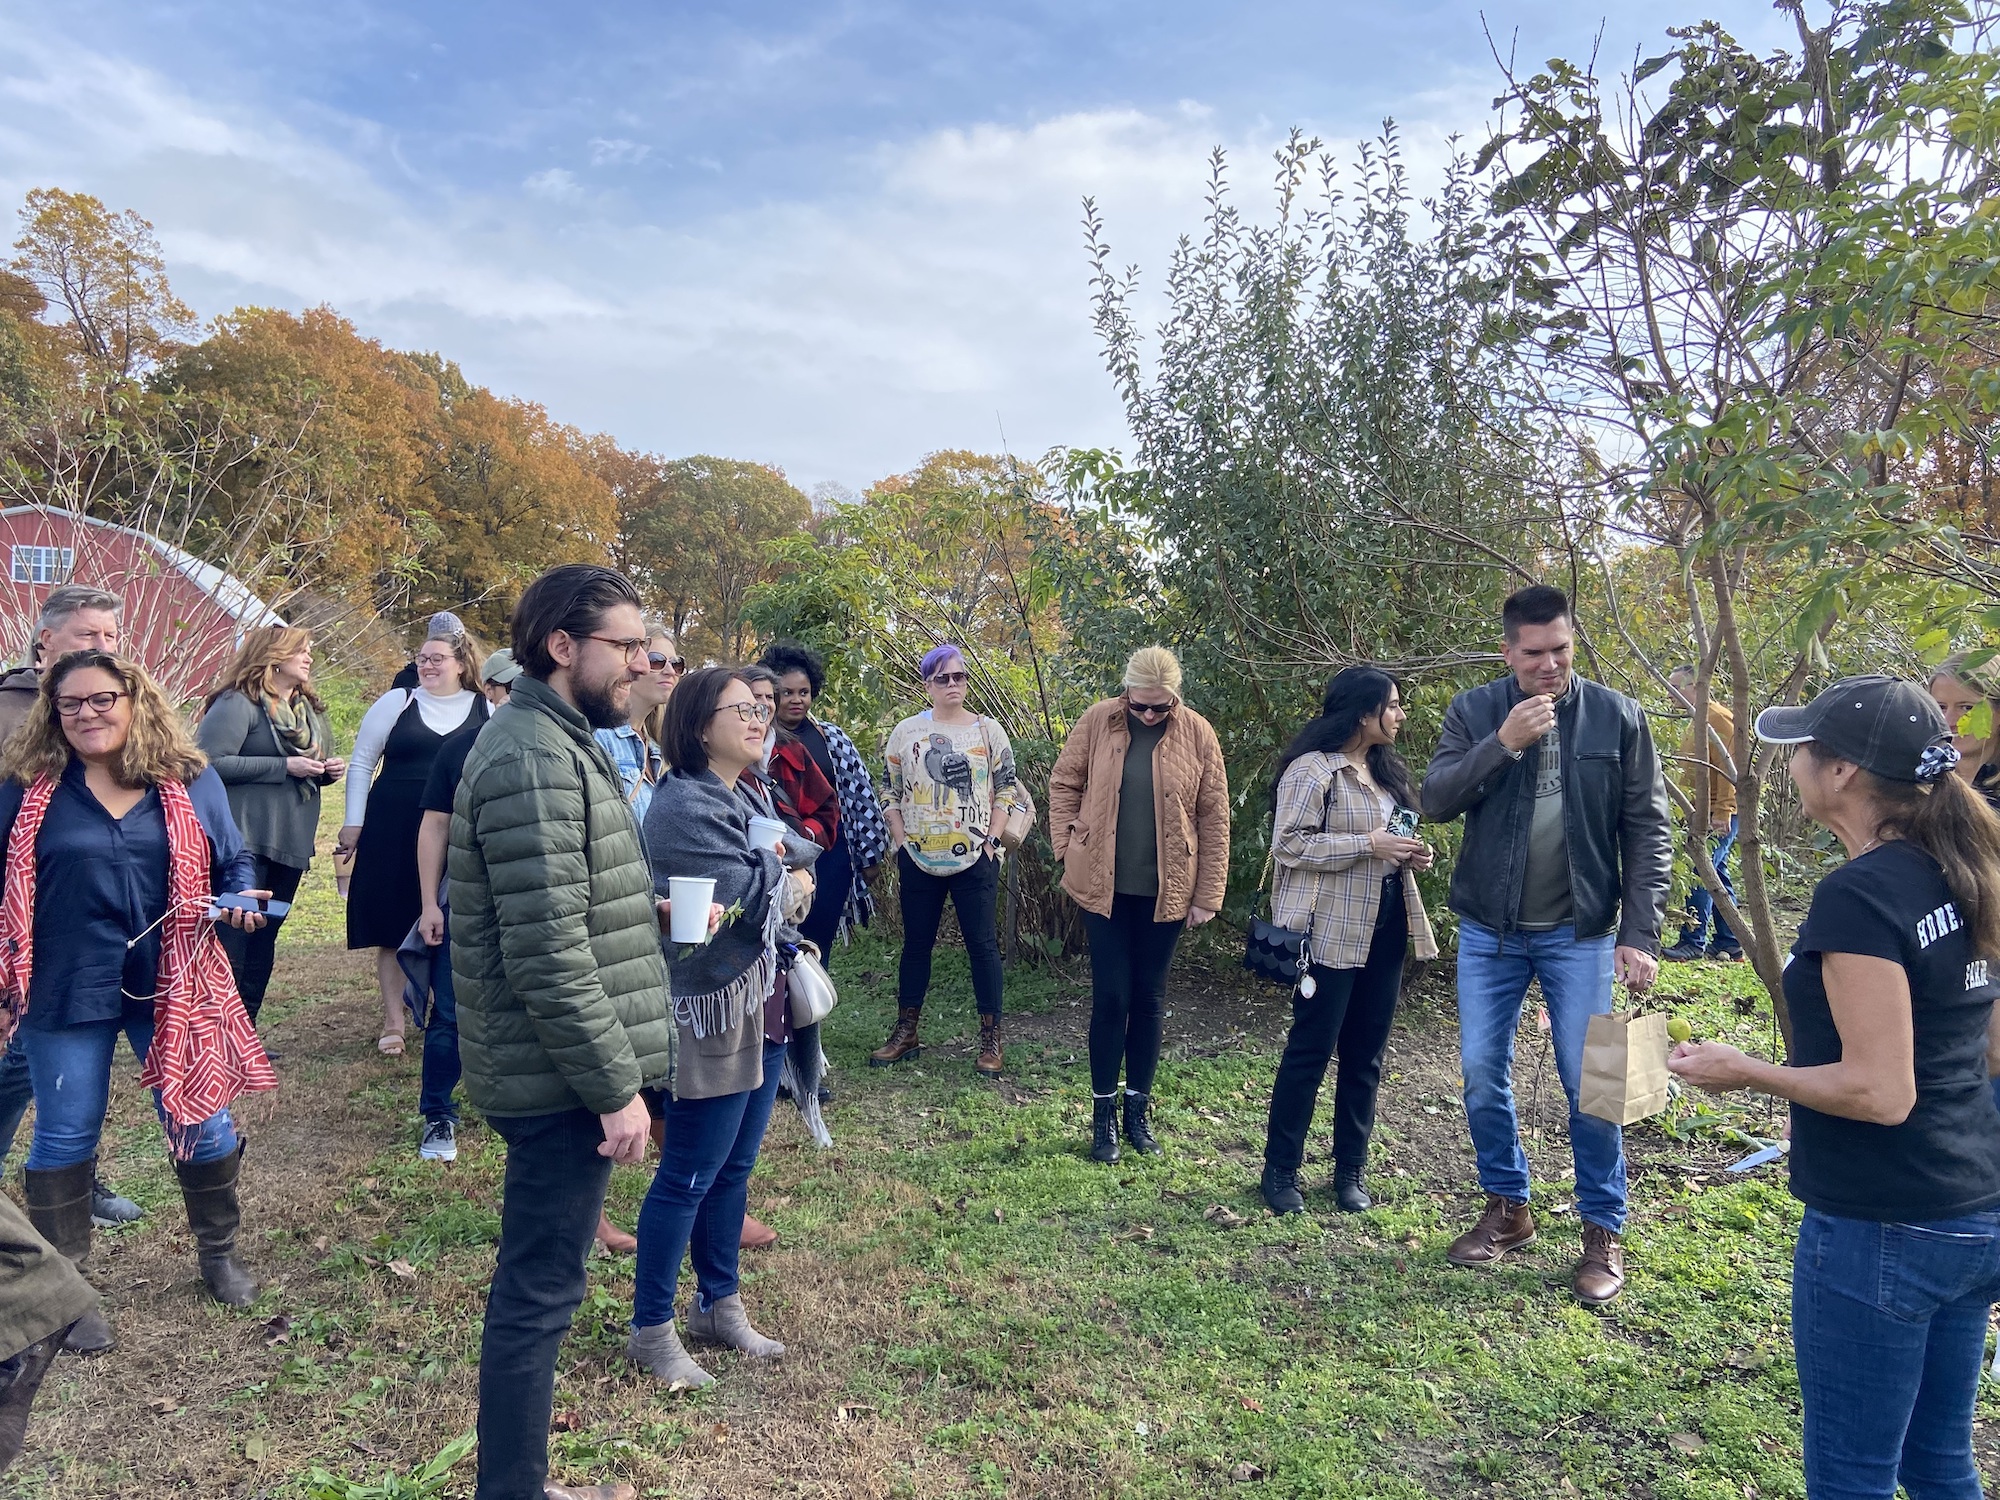 The LMD team is listening attentively, standing in a clearing surrounded by fall foliage.